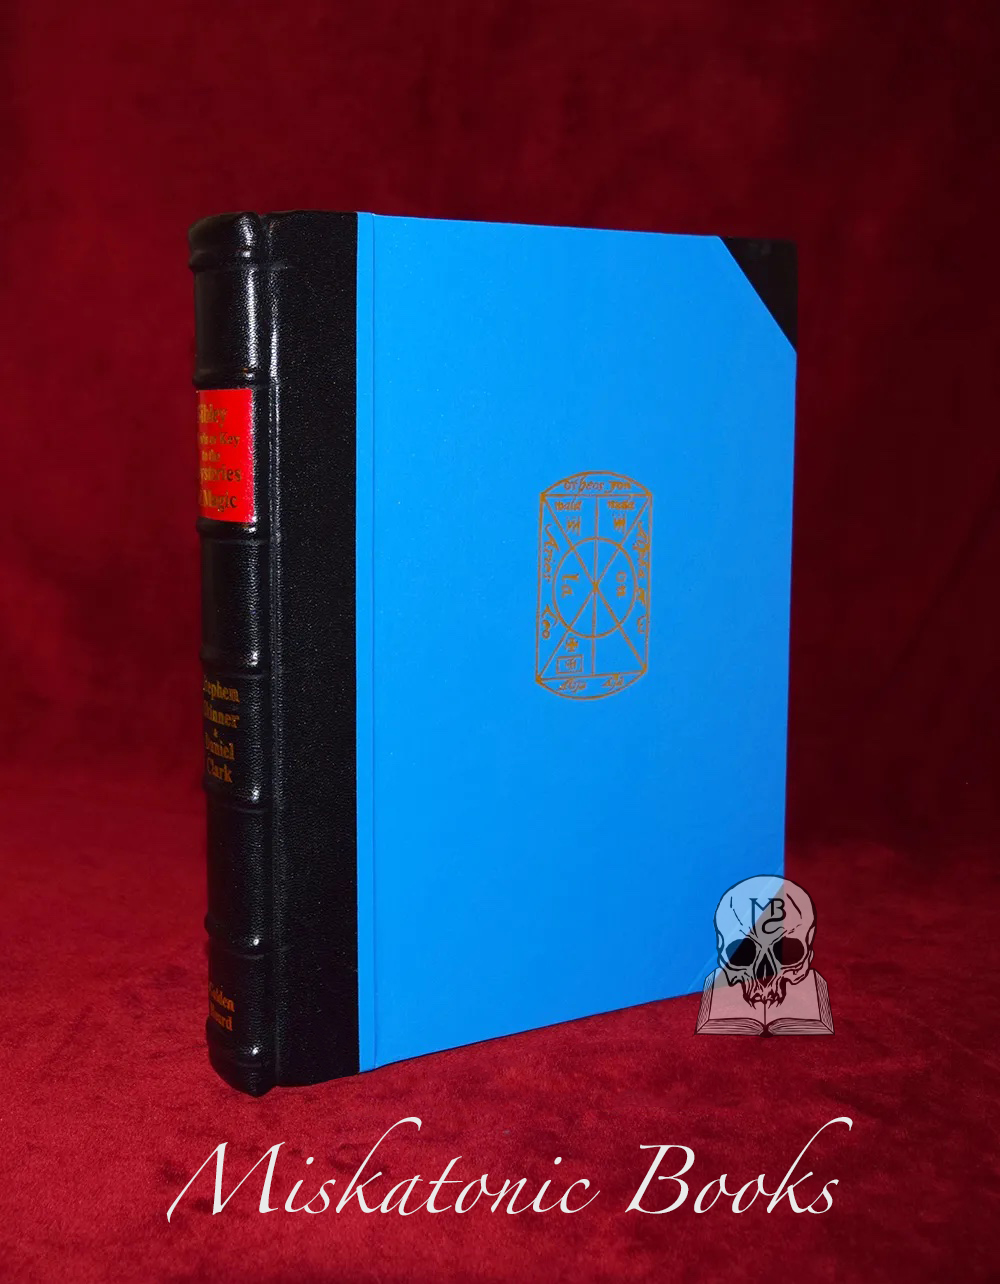 CLAVIS OR KEY TO THE MYSTERIES OF MAGIC by Rabbi Solomon, translated by Ebenezer Sibley with an Introduction by Dr Stephen Skinner & Daniel Clark (SIGNED Deluxe Leather Bound Limited Edition Hardcover)